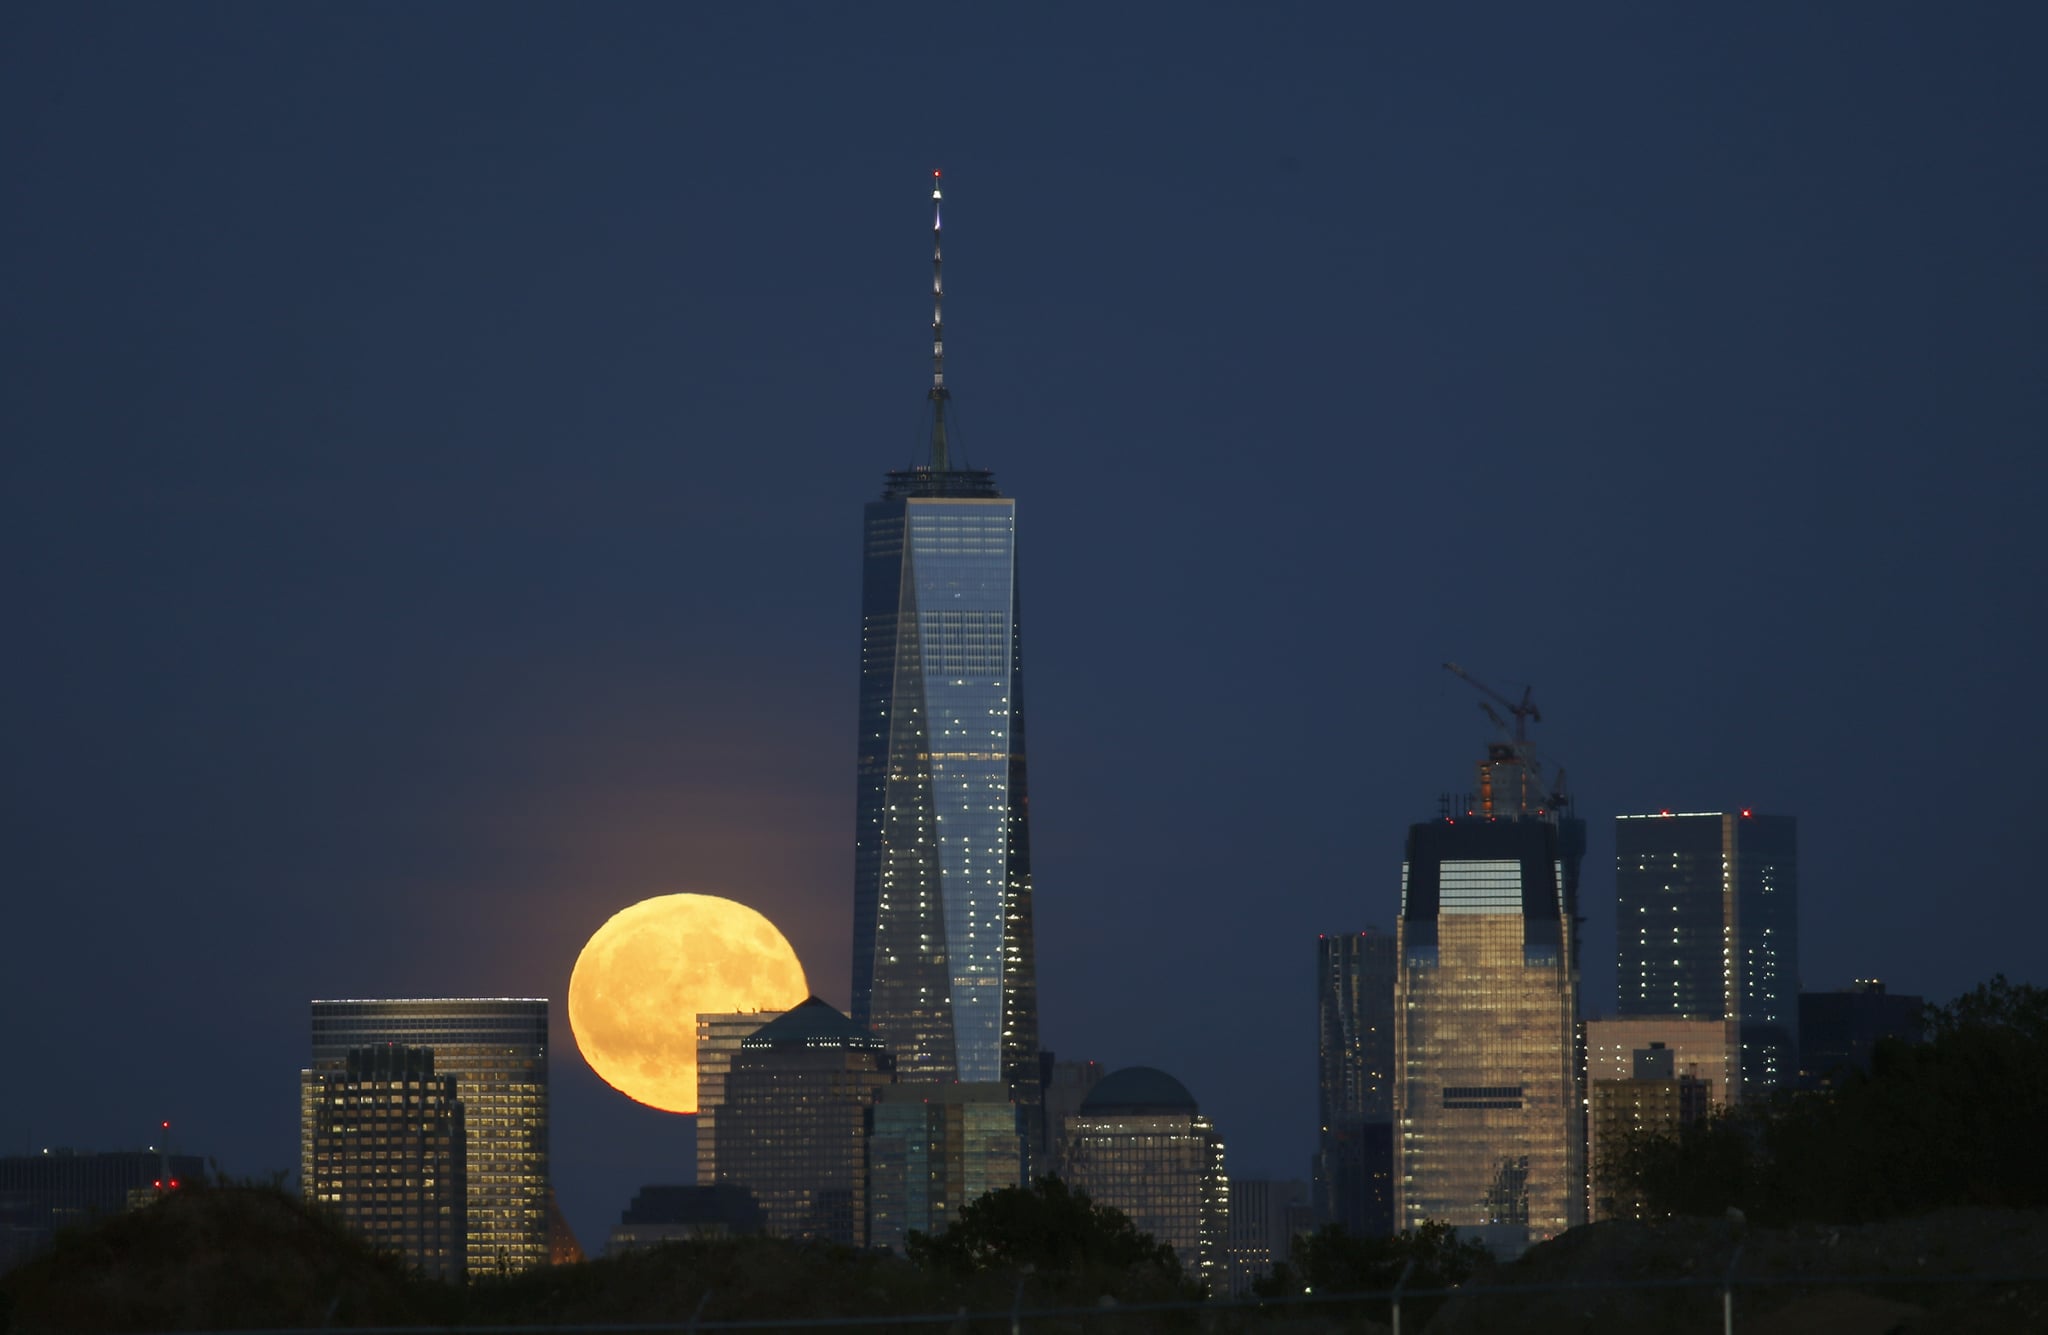 NEWARK, NJ - SEPTEMBER 16: A full harvest moon rises behind Lower Manhattan and One World Trade Centre in New York City on September 16, 2016 as seen from Newark, NJ. (Photo by Gary Hershorn/Getty Images)